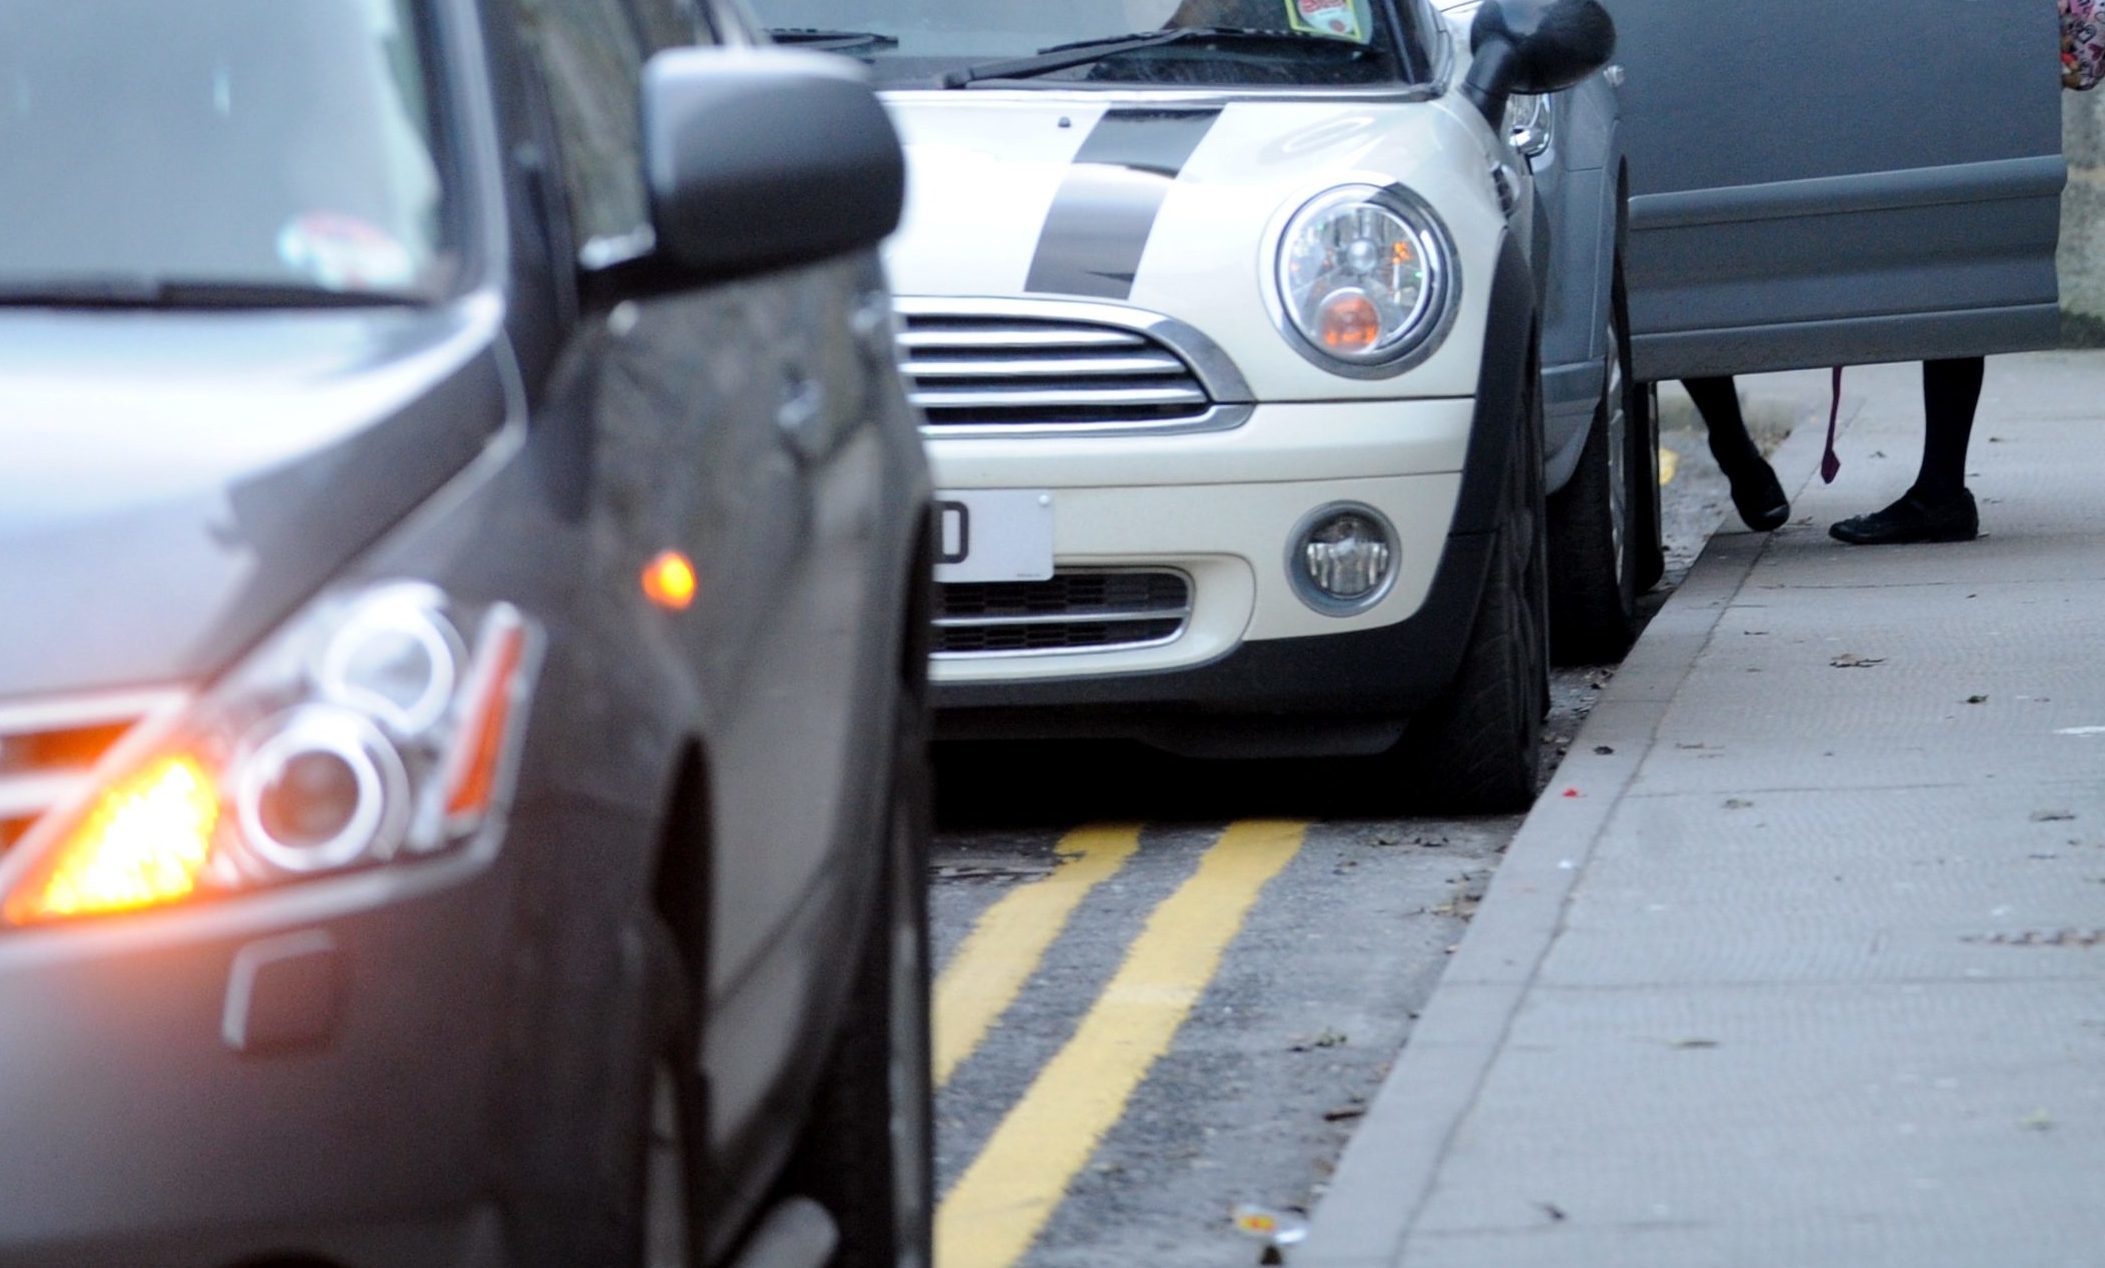 Councillors say there are options to alleviate Blairgowrie's parking issues